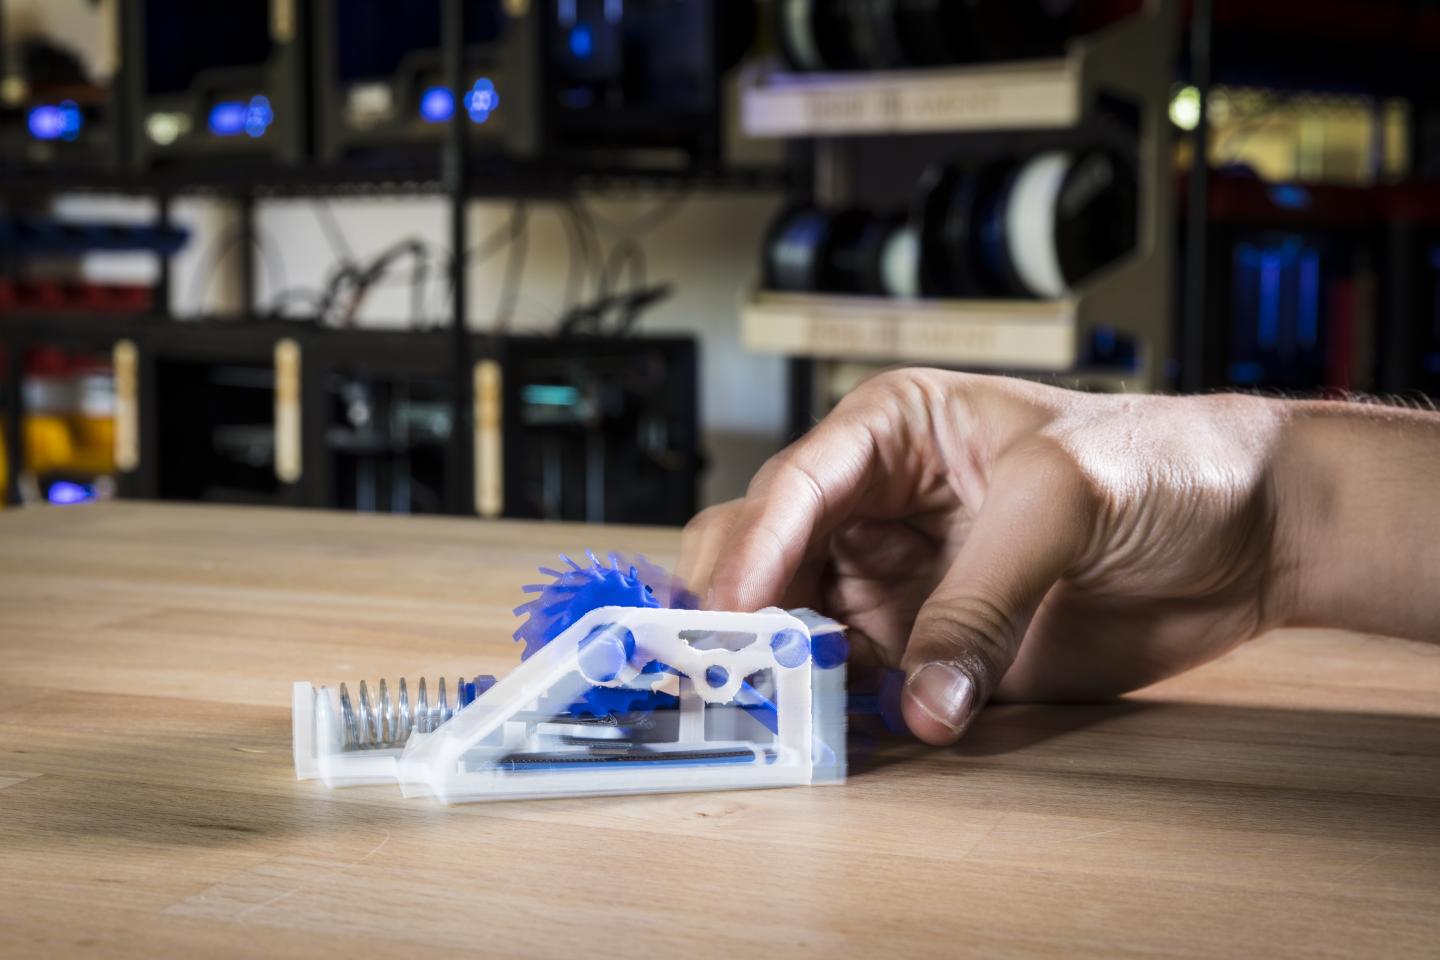 A 3D Printed Prototype of a Device that Can Store Information